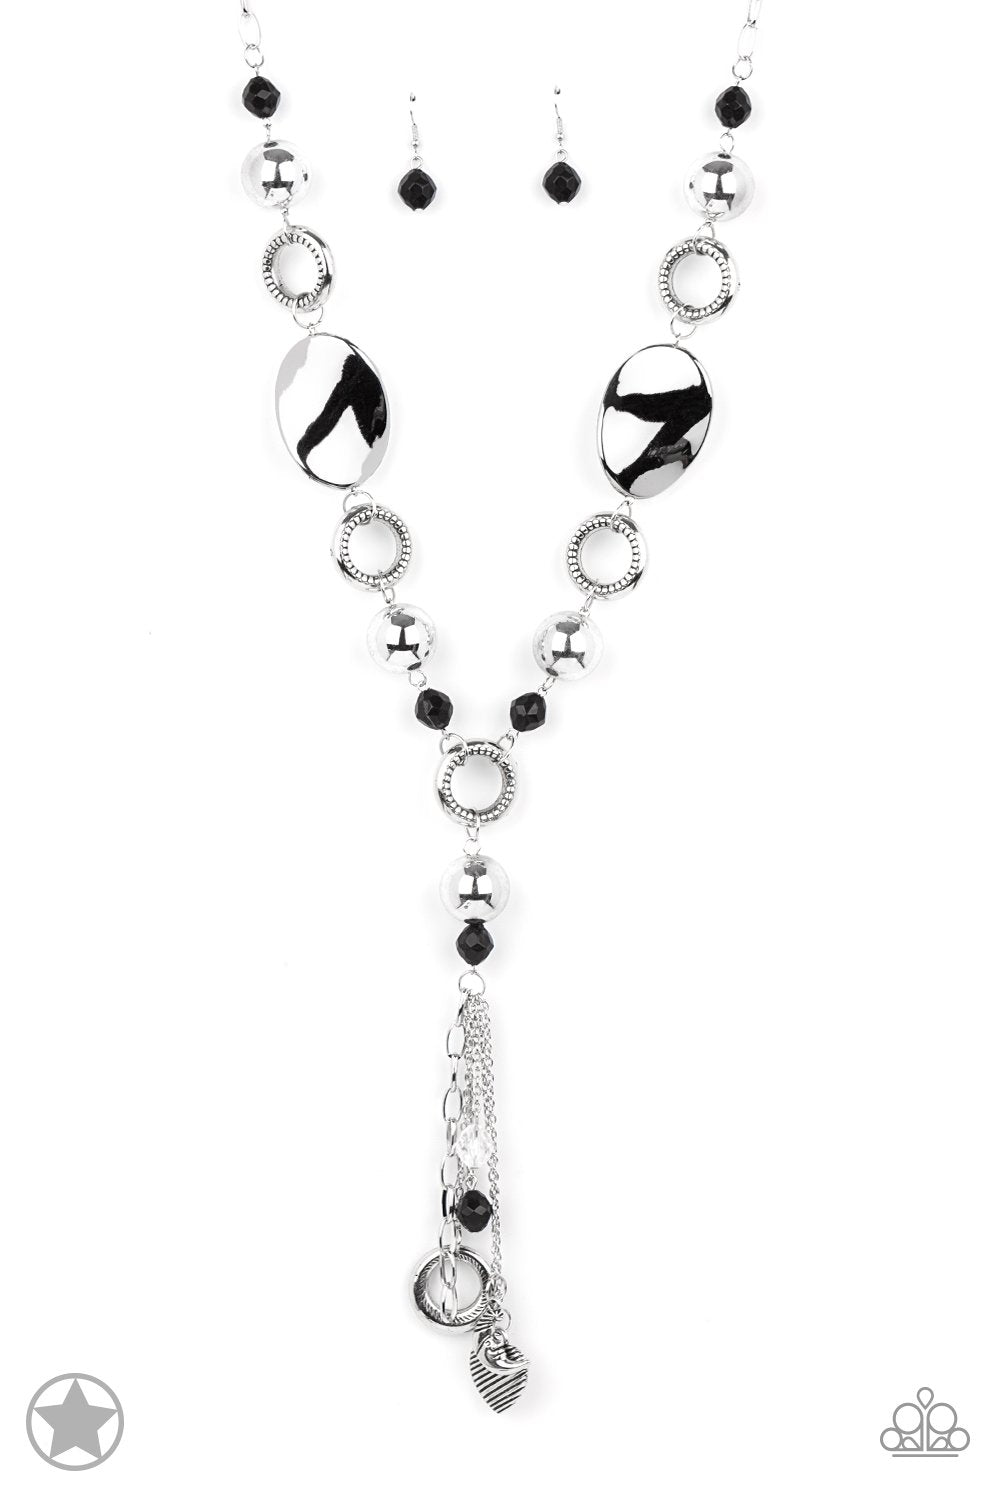 Total Eclipse of the Heart Long Silver Tassel Necklace and matching Earrings - Paparazzi Accessories - lightbox -CarasShop.com - $5 Jewelry by Cara Jewels